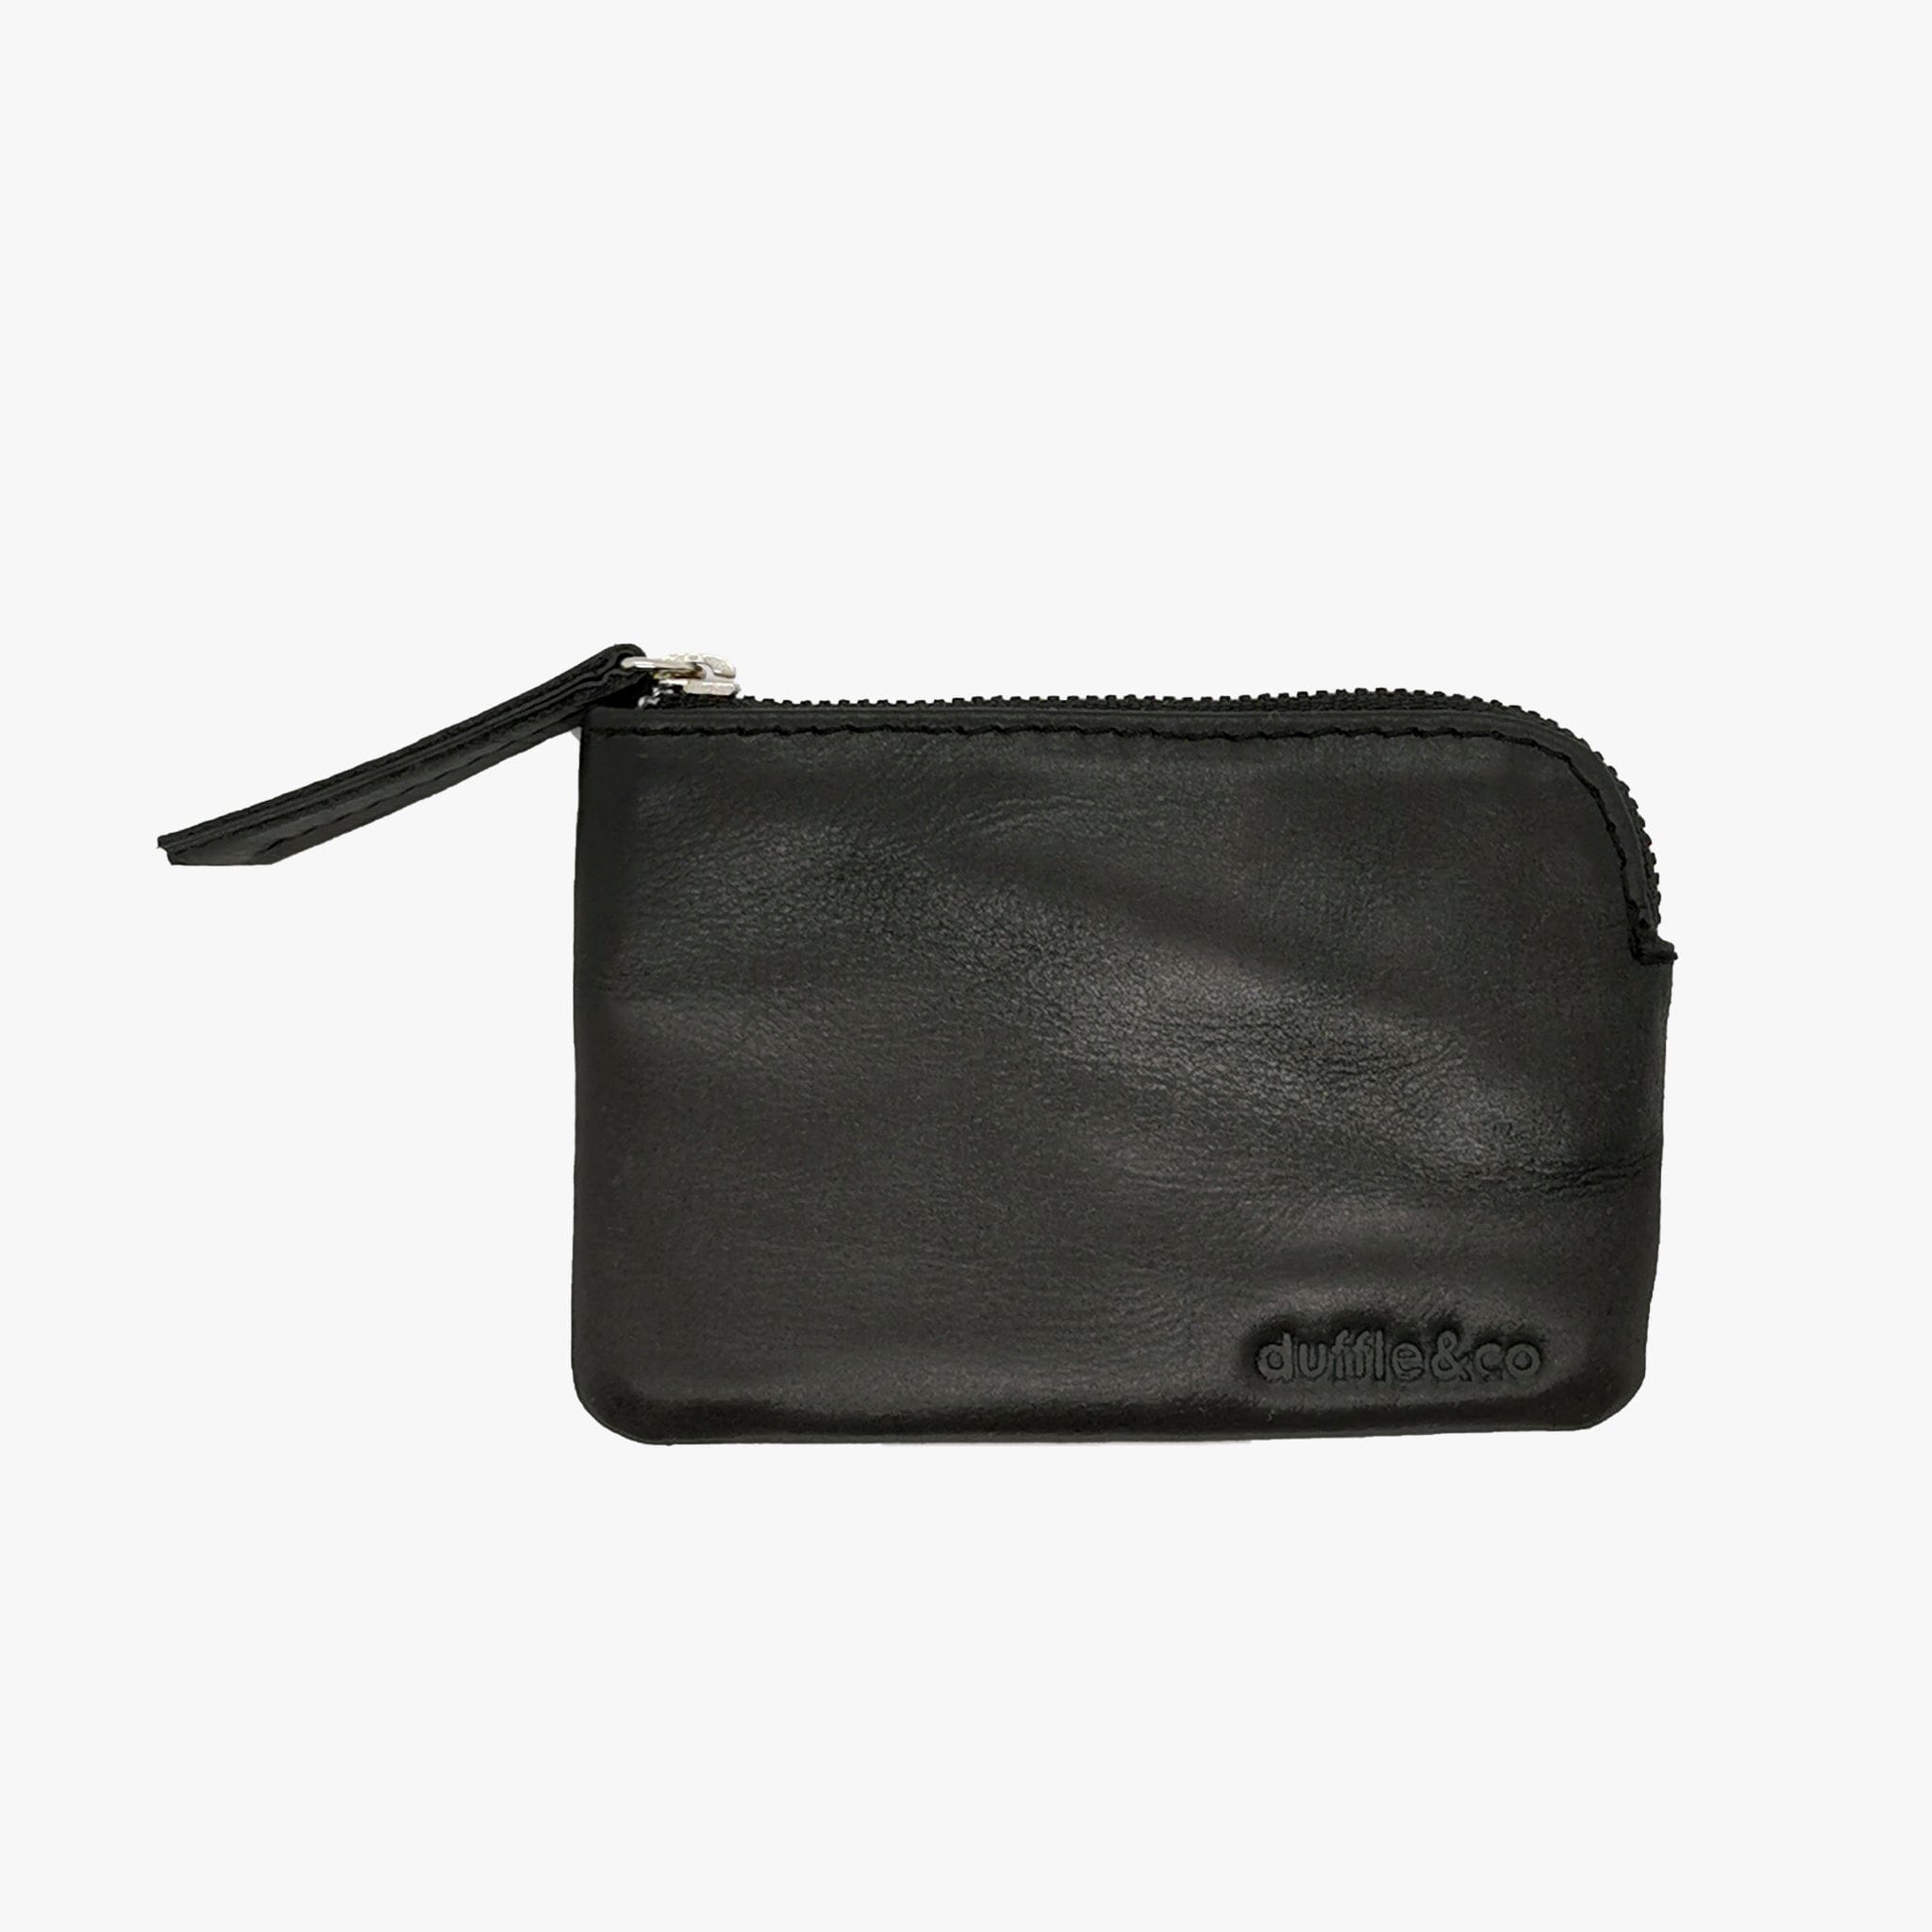 Cooke Pouch Leather Wallet in Black by Duffle&Co